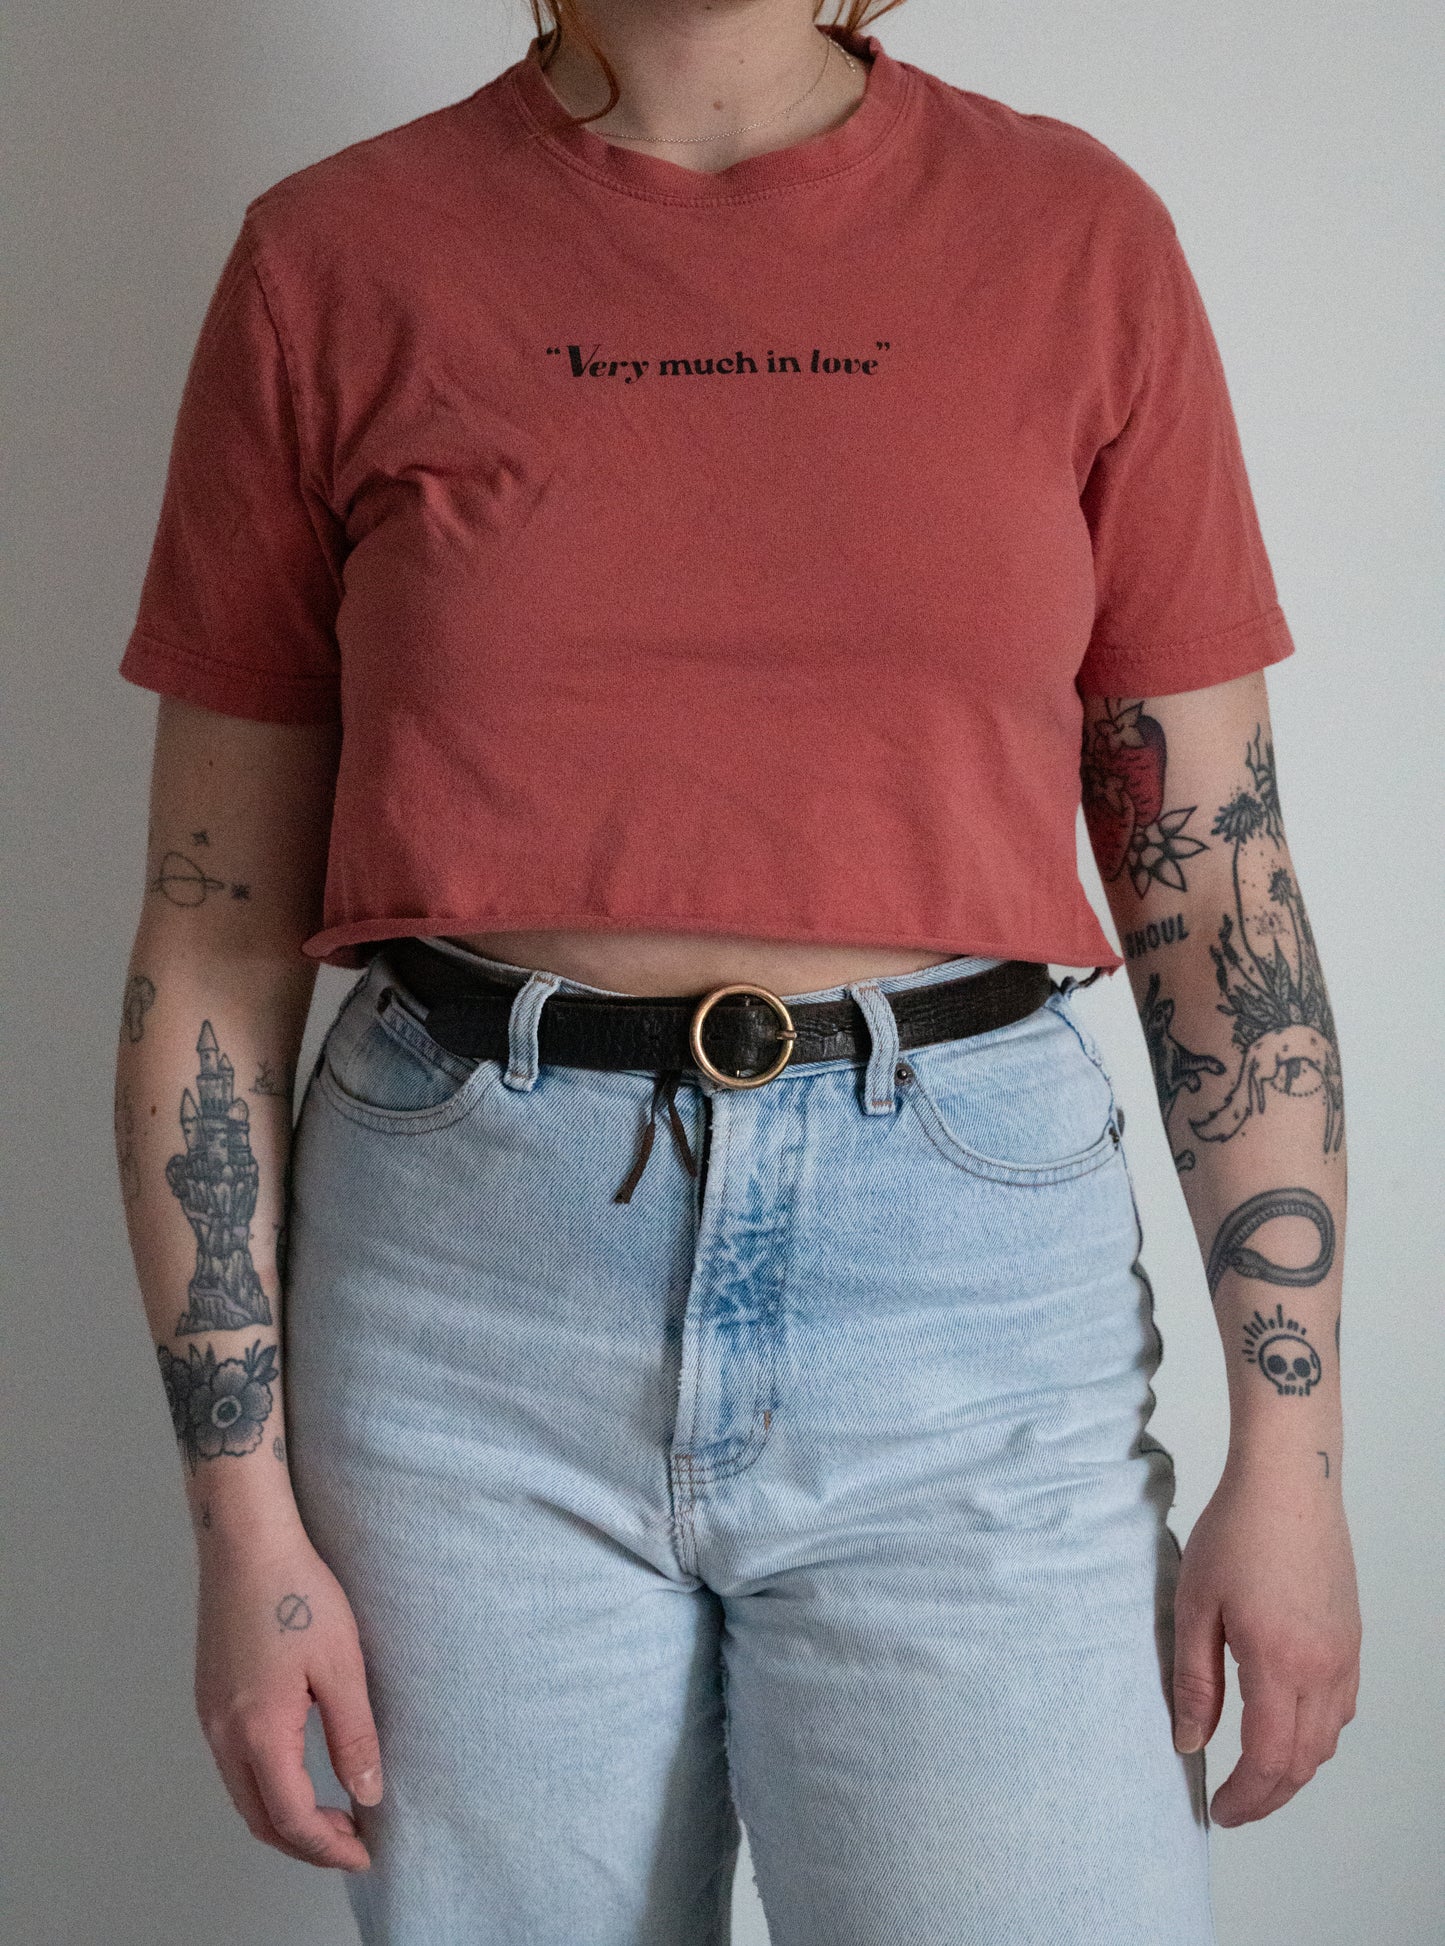 "Very Much In Love" Cropped Pink Tee - Size S